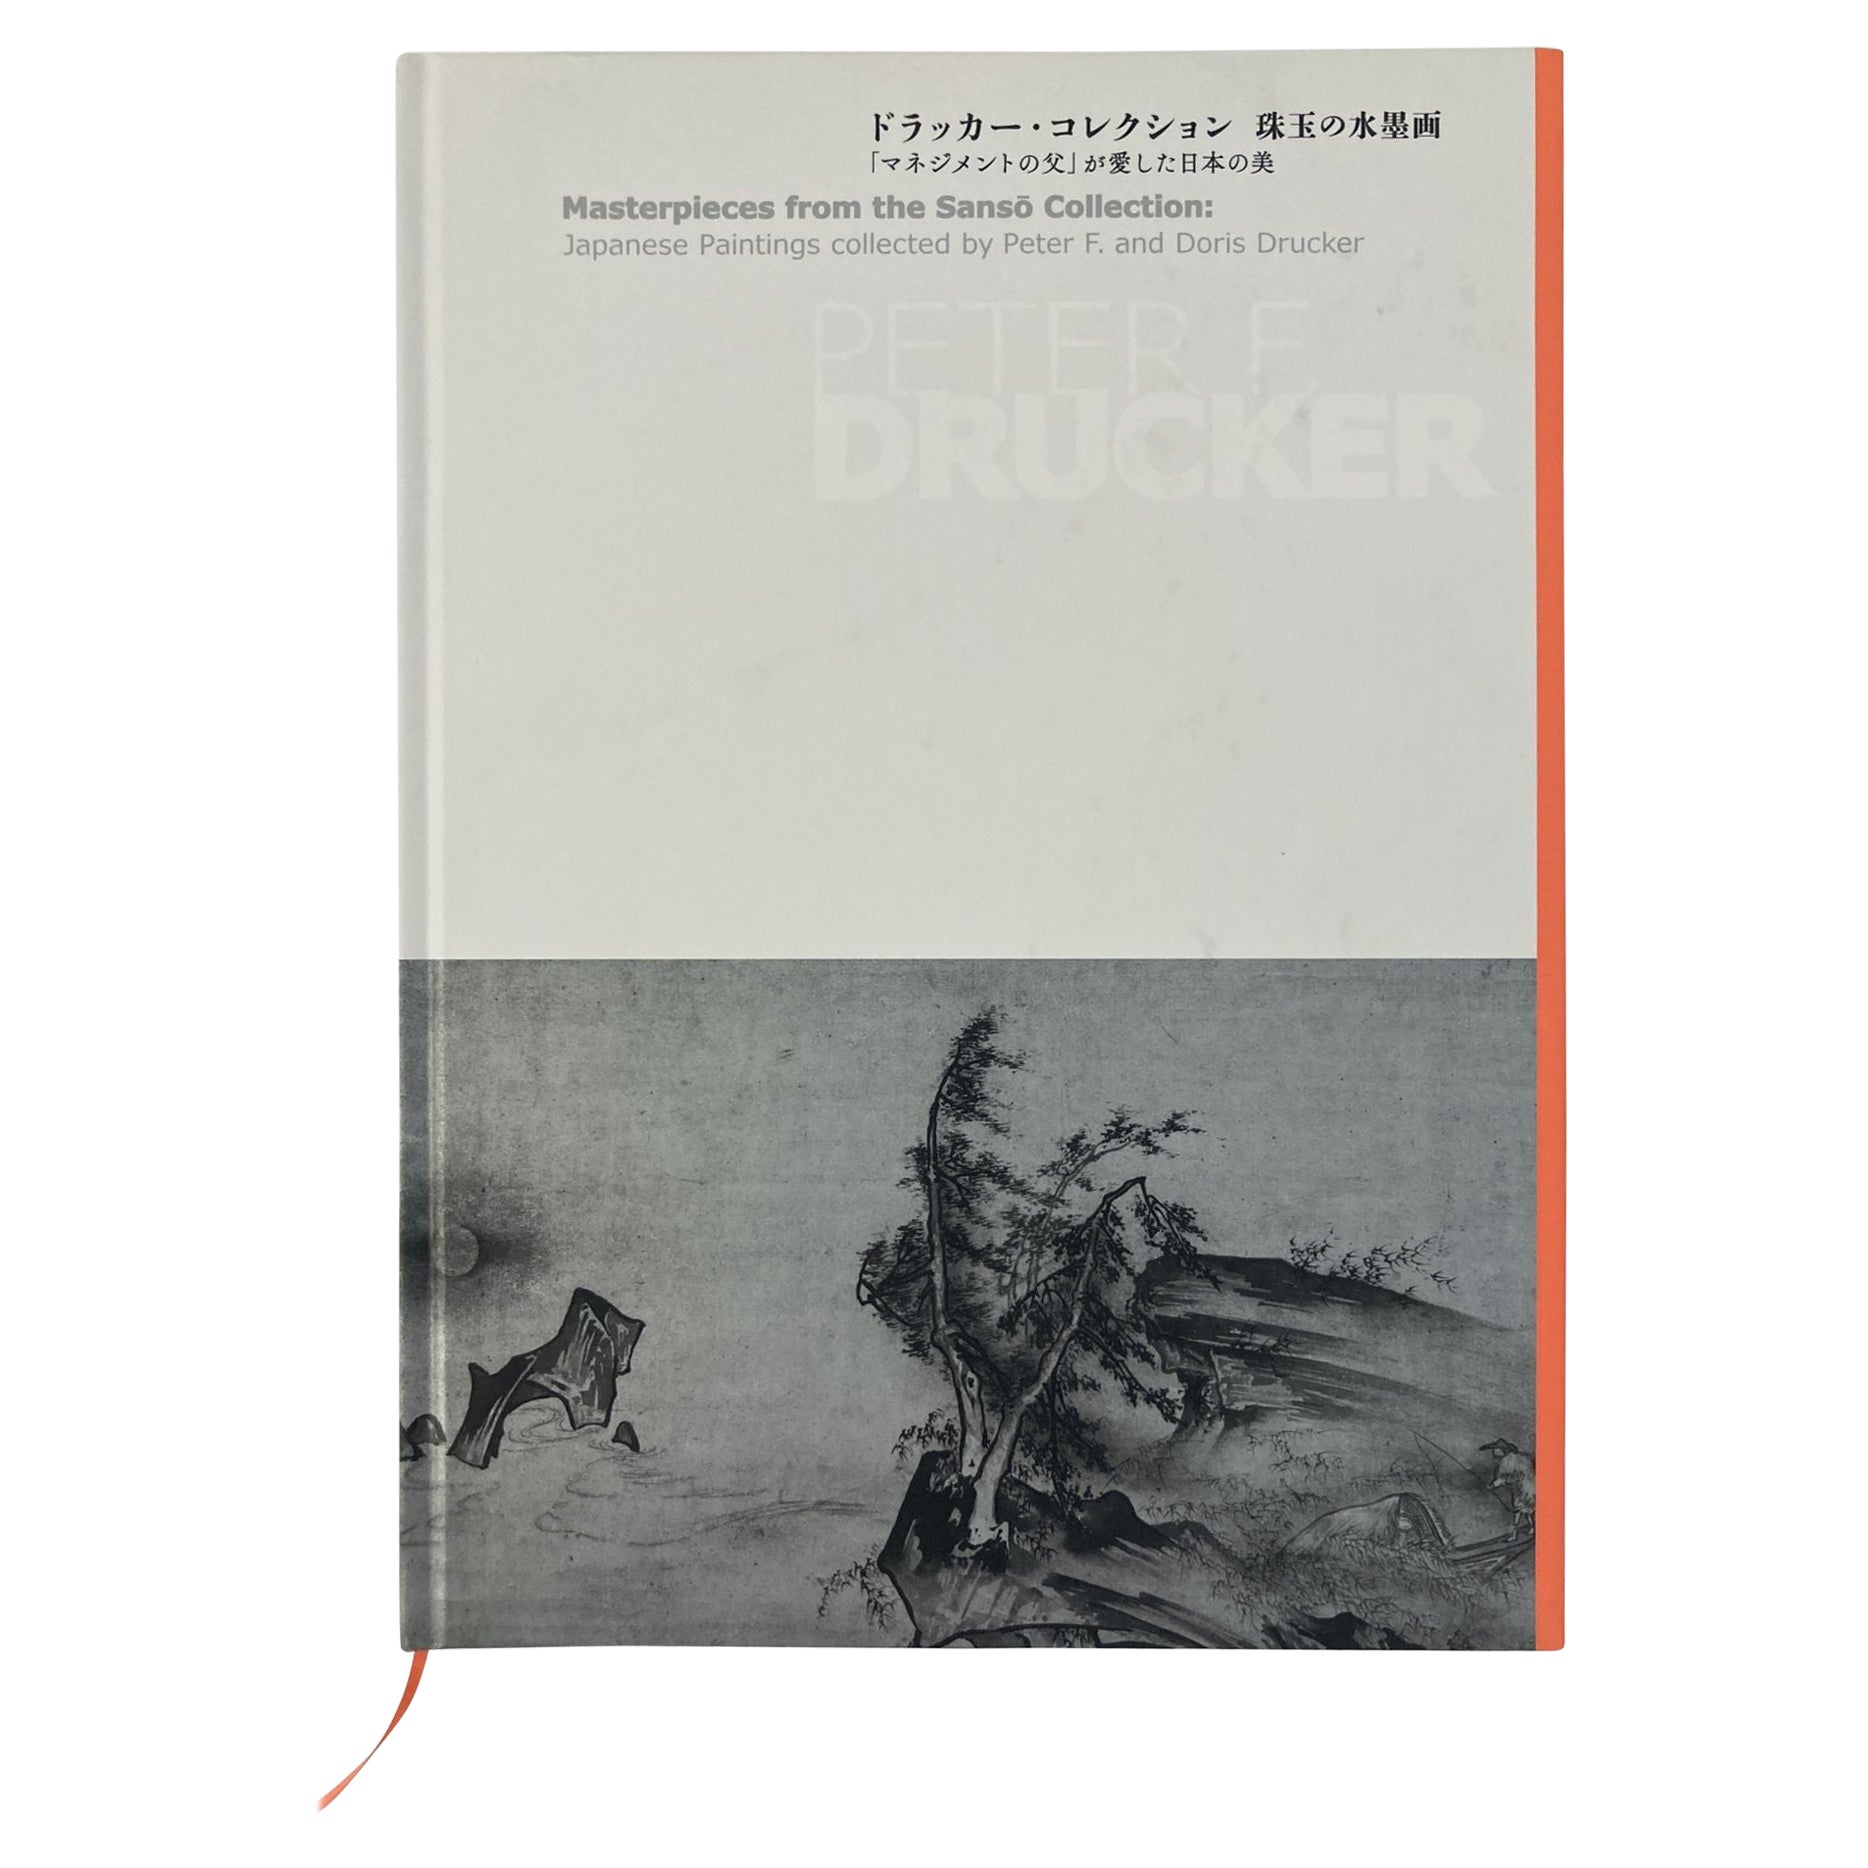 Masterpieces from the Sanso Collection Japanese Paintings by Peter F. Drucker For Sale